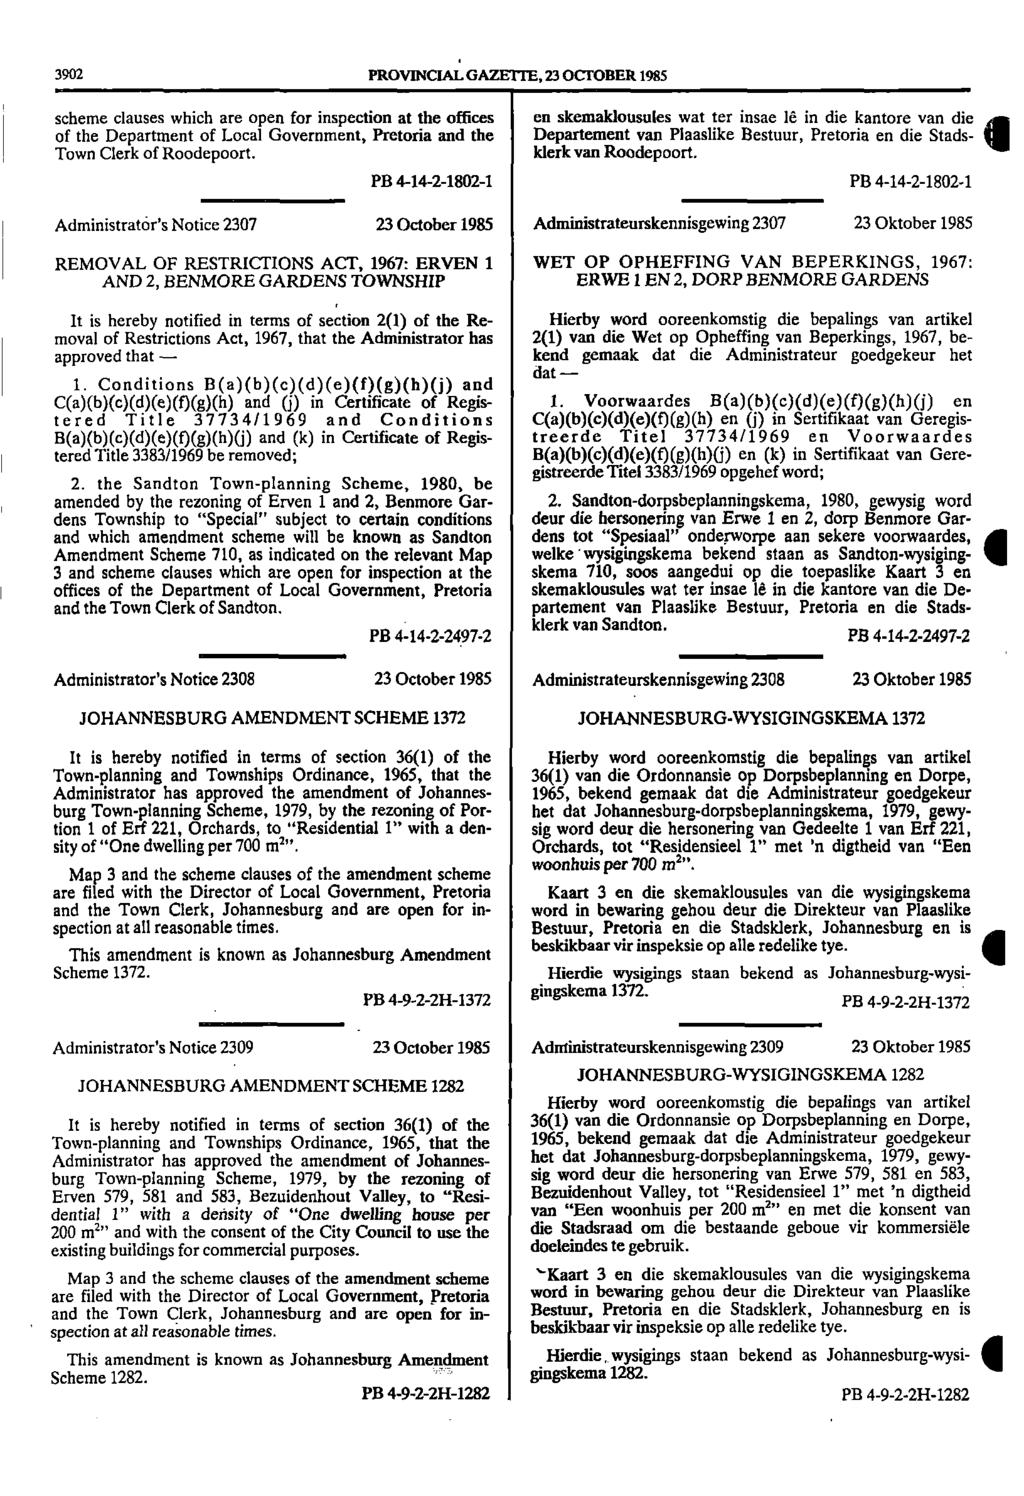 3902 PROVINCIAL GAZETTE, 23 OCTOBER 1985 scheme clauses which are open for inspection at the offices of the Department of Local Government, Pretoria and the Town Clerk of Roodepoort.